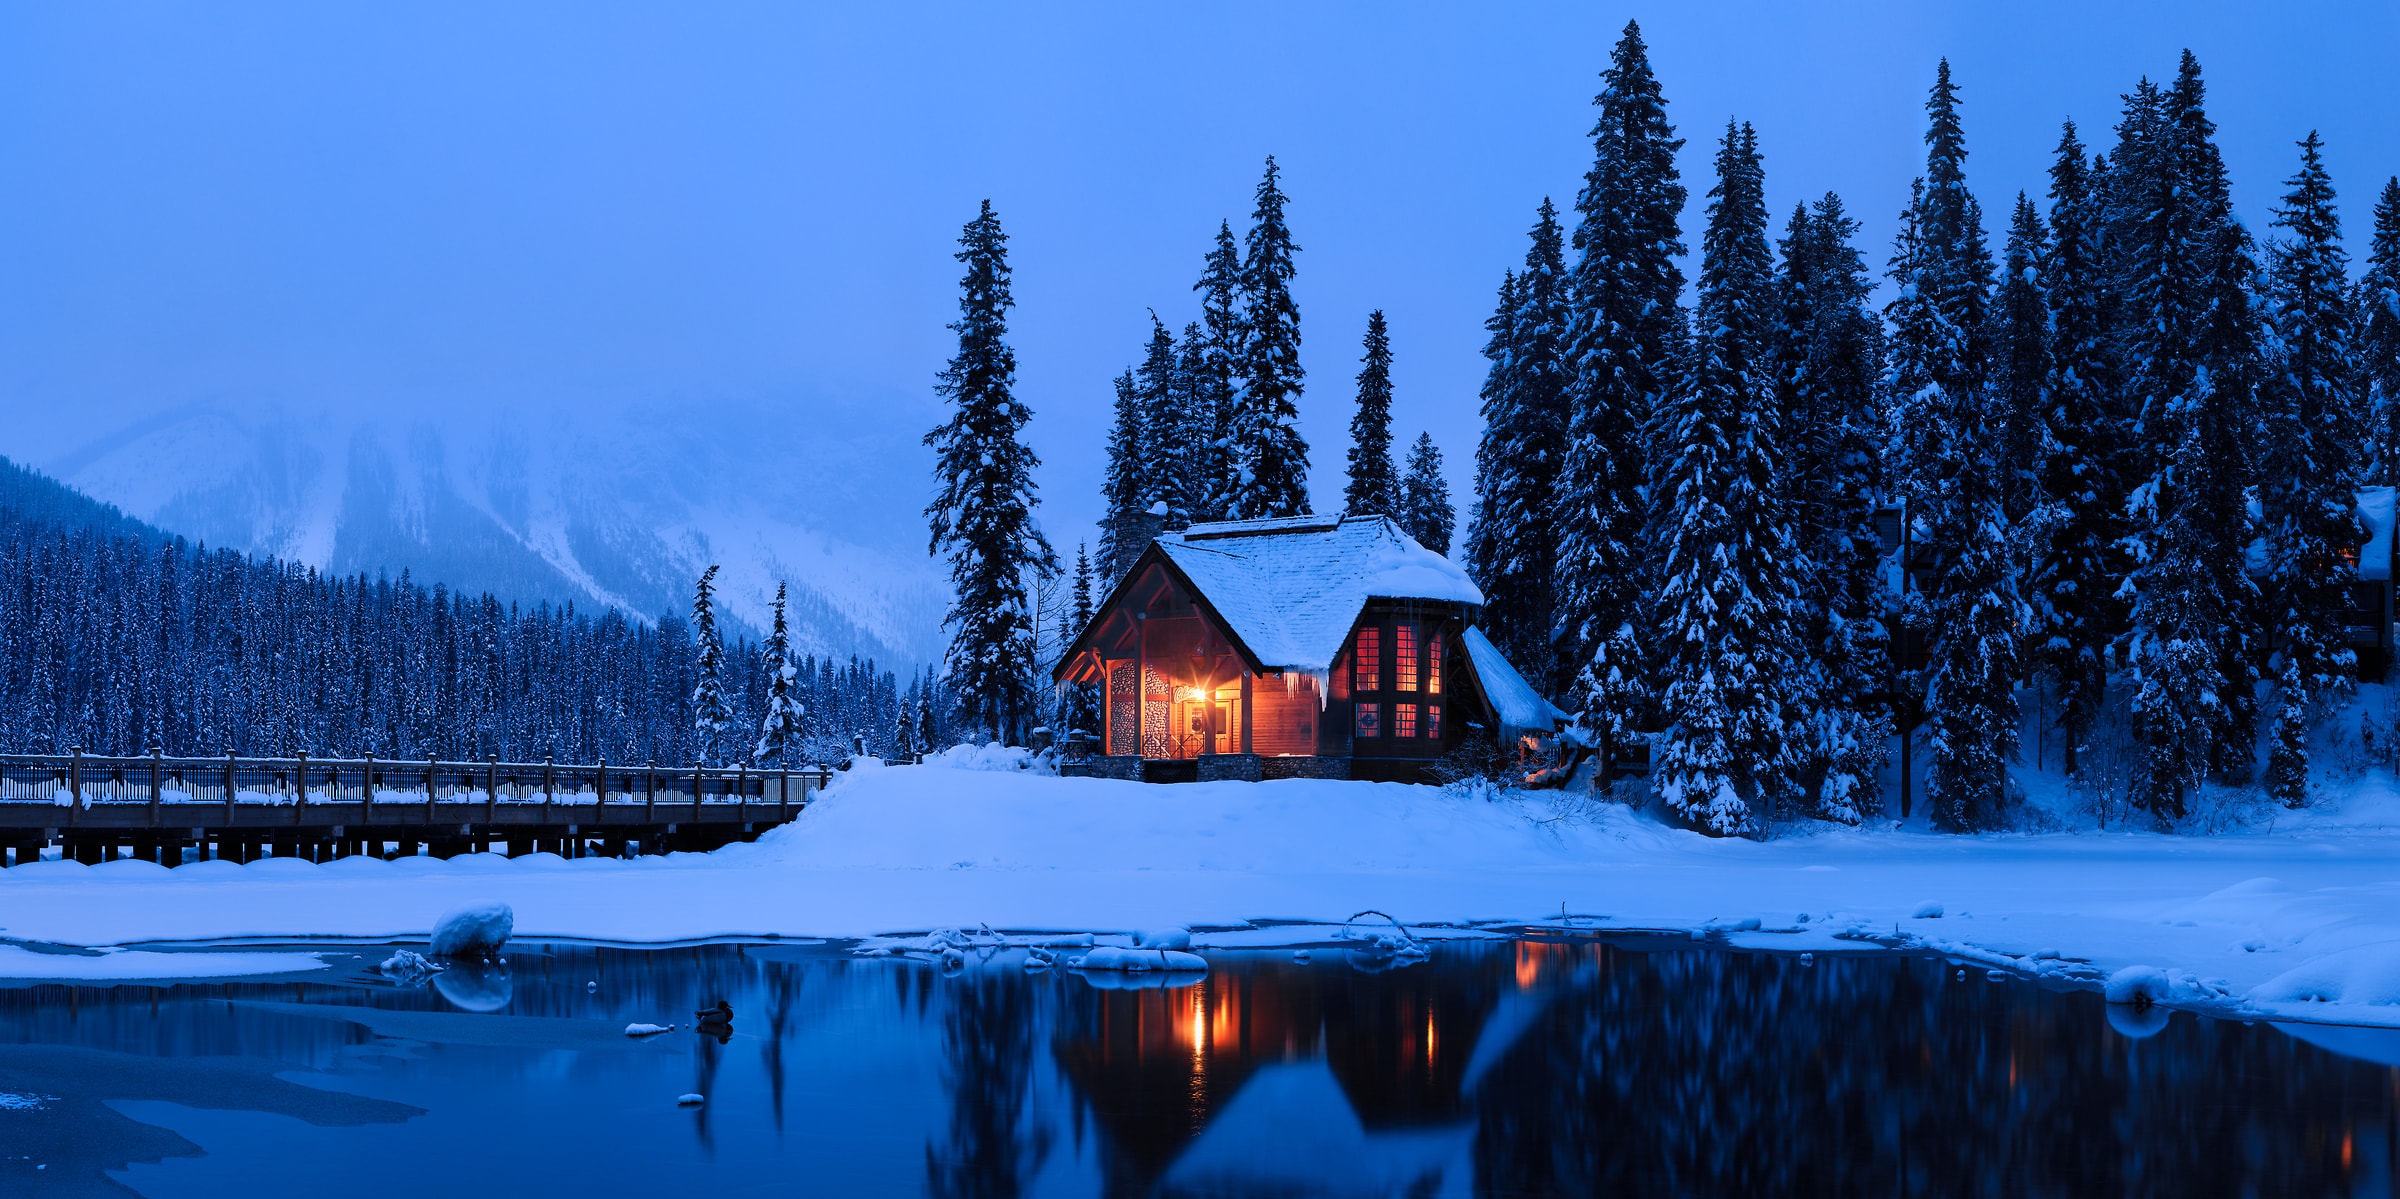 357 megapixels! A very high resolution, large-format VAST photo of a cozy nature scene with a snow covered forest, icy lake, a warm ski cabin in the woods, and snowy mountains; large-format photo print created at twilight by Scott Dimond in Yoho National Park, British Columbia, Canada.